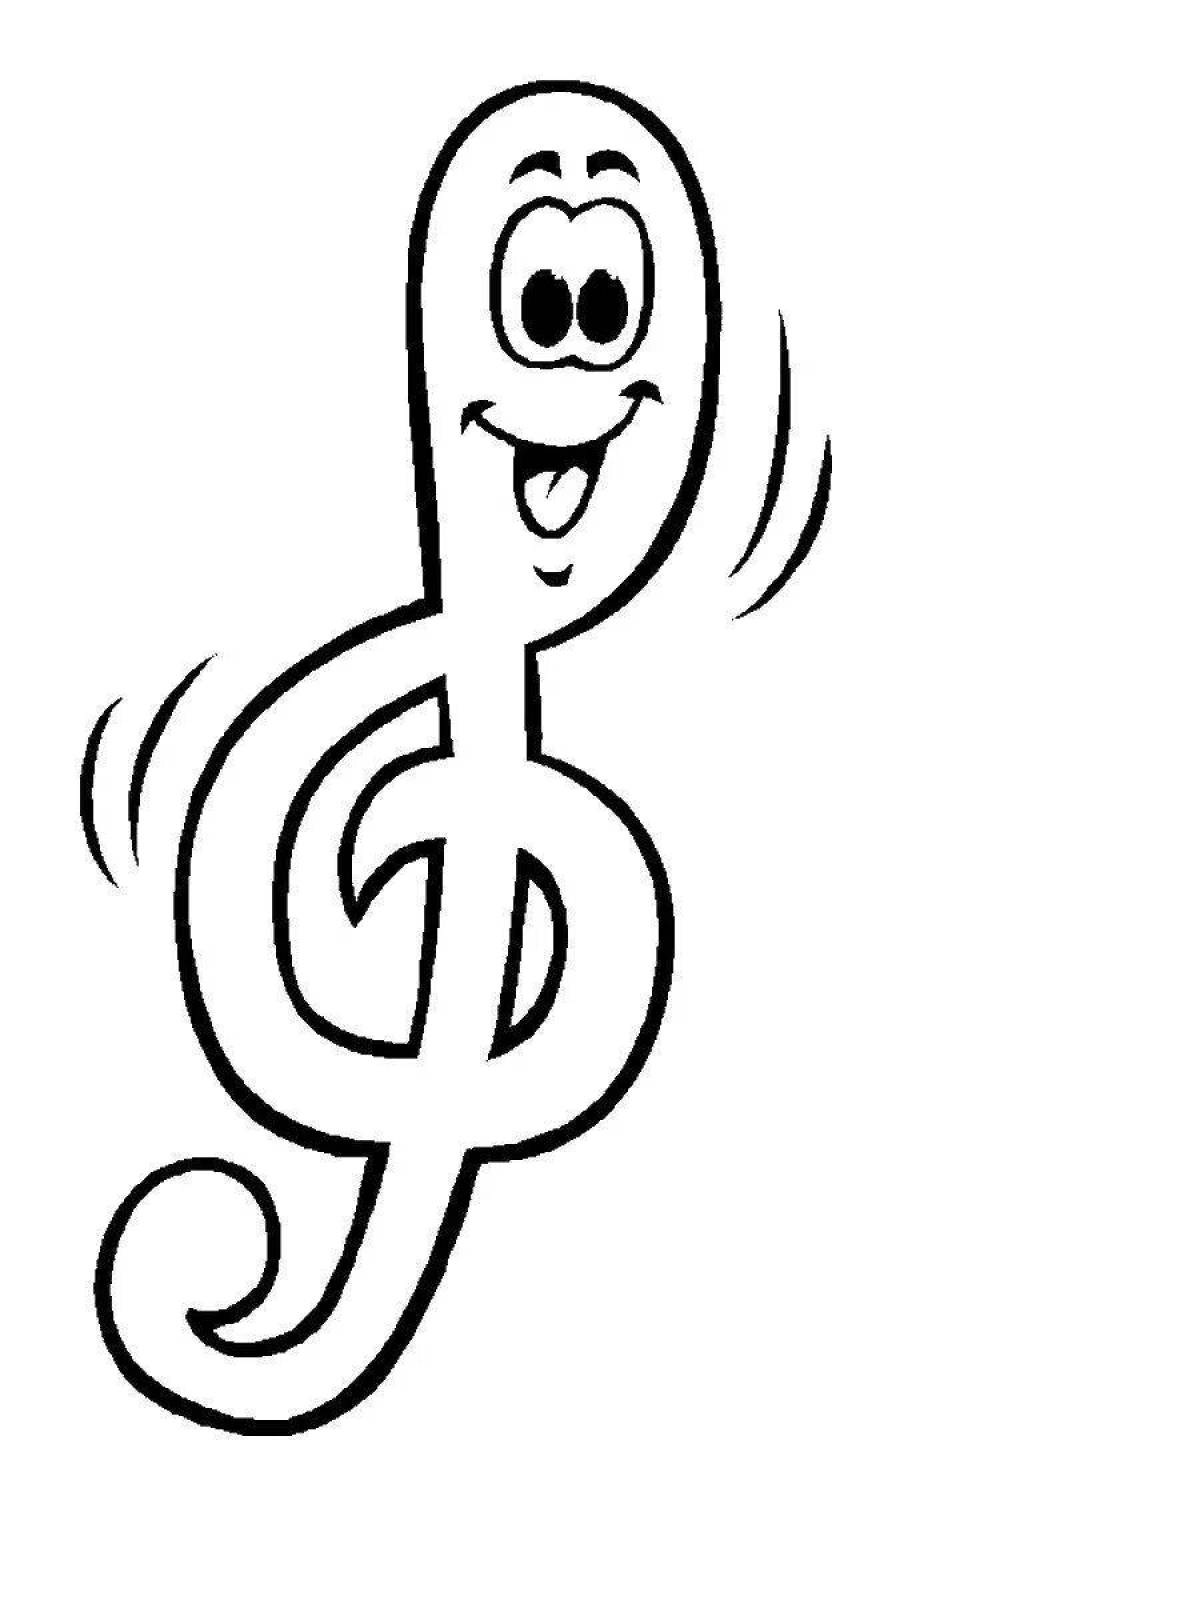 Exciting musical note coloring book